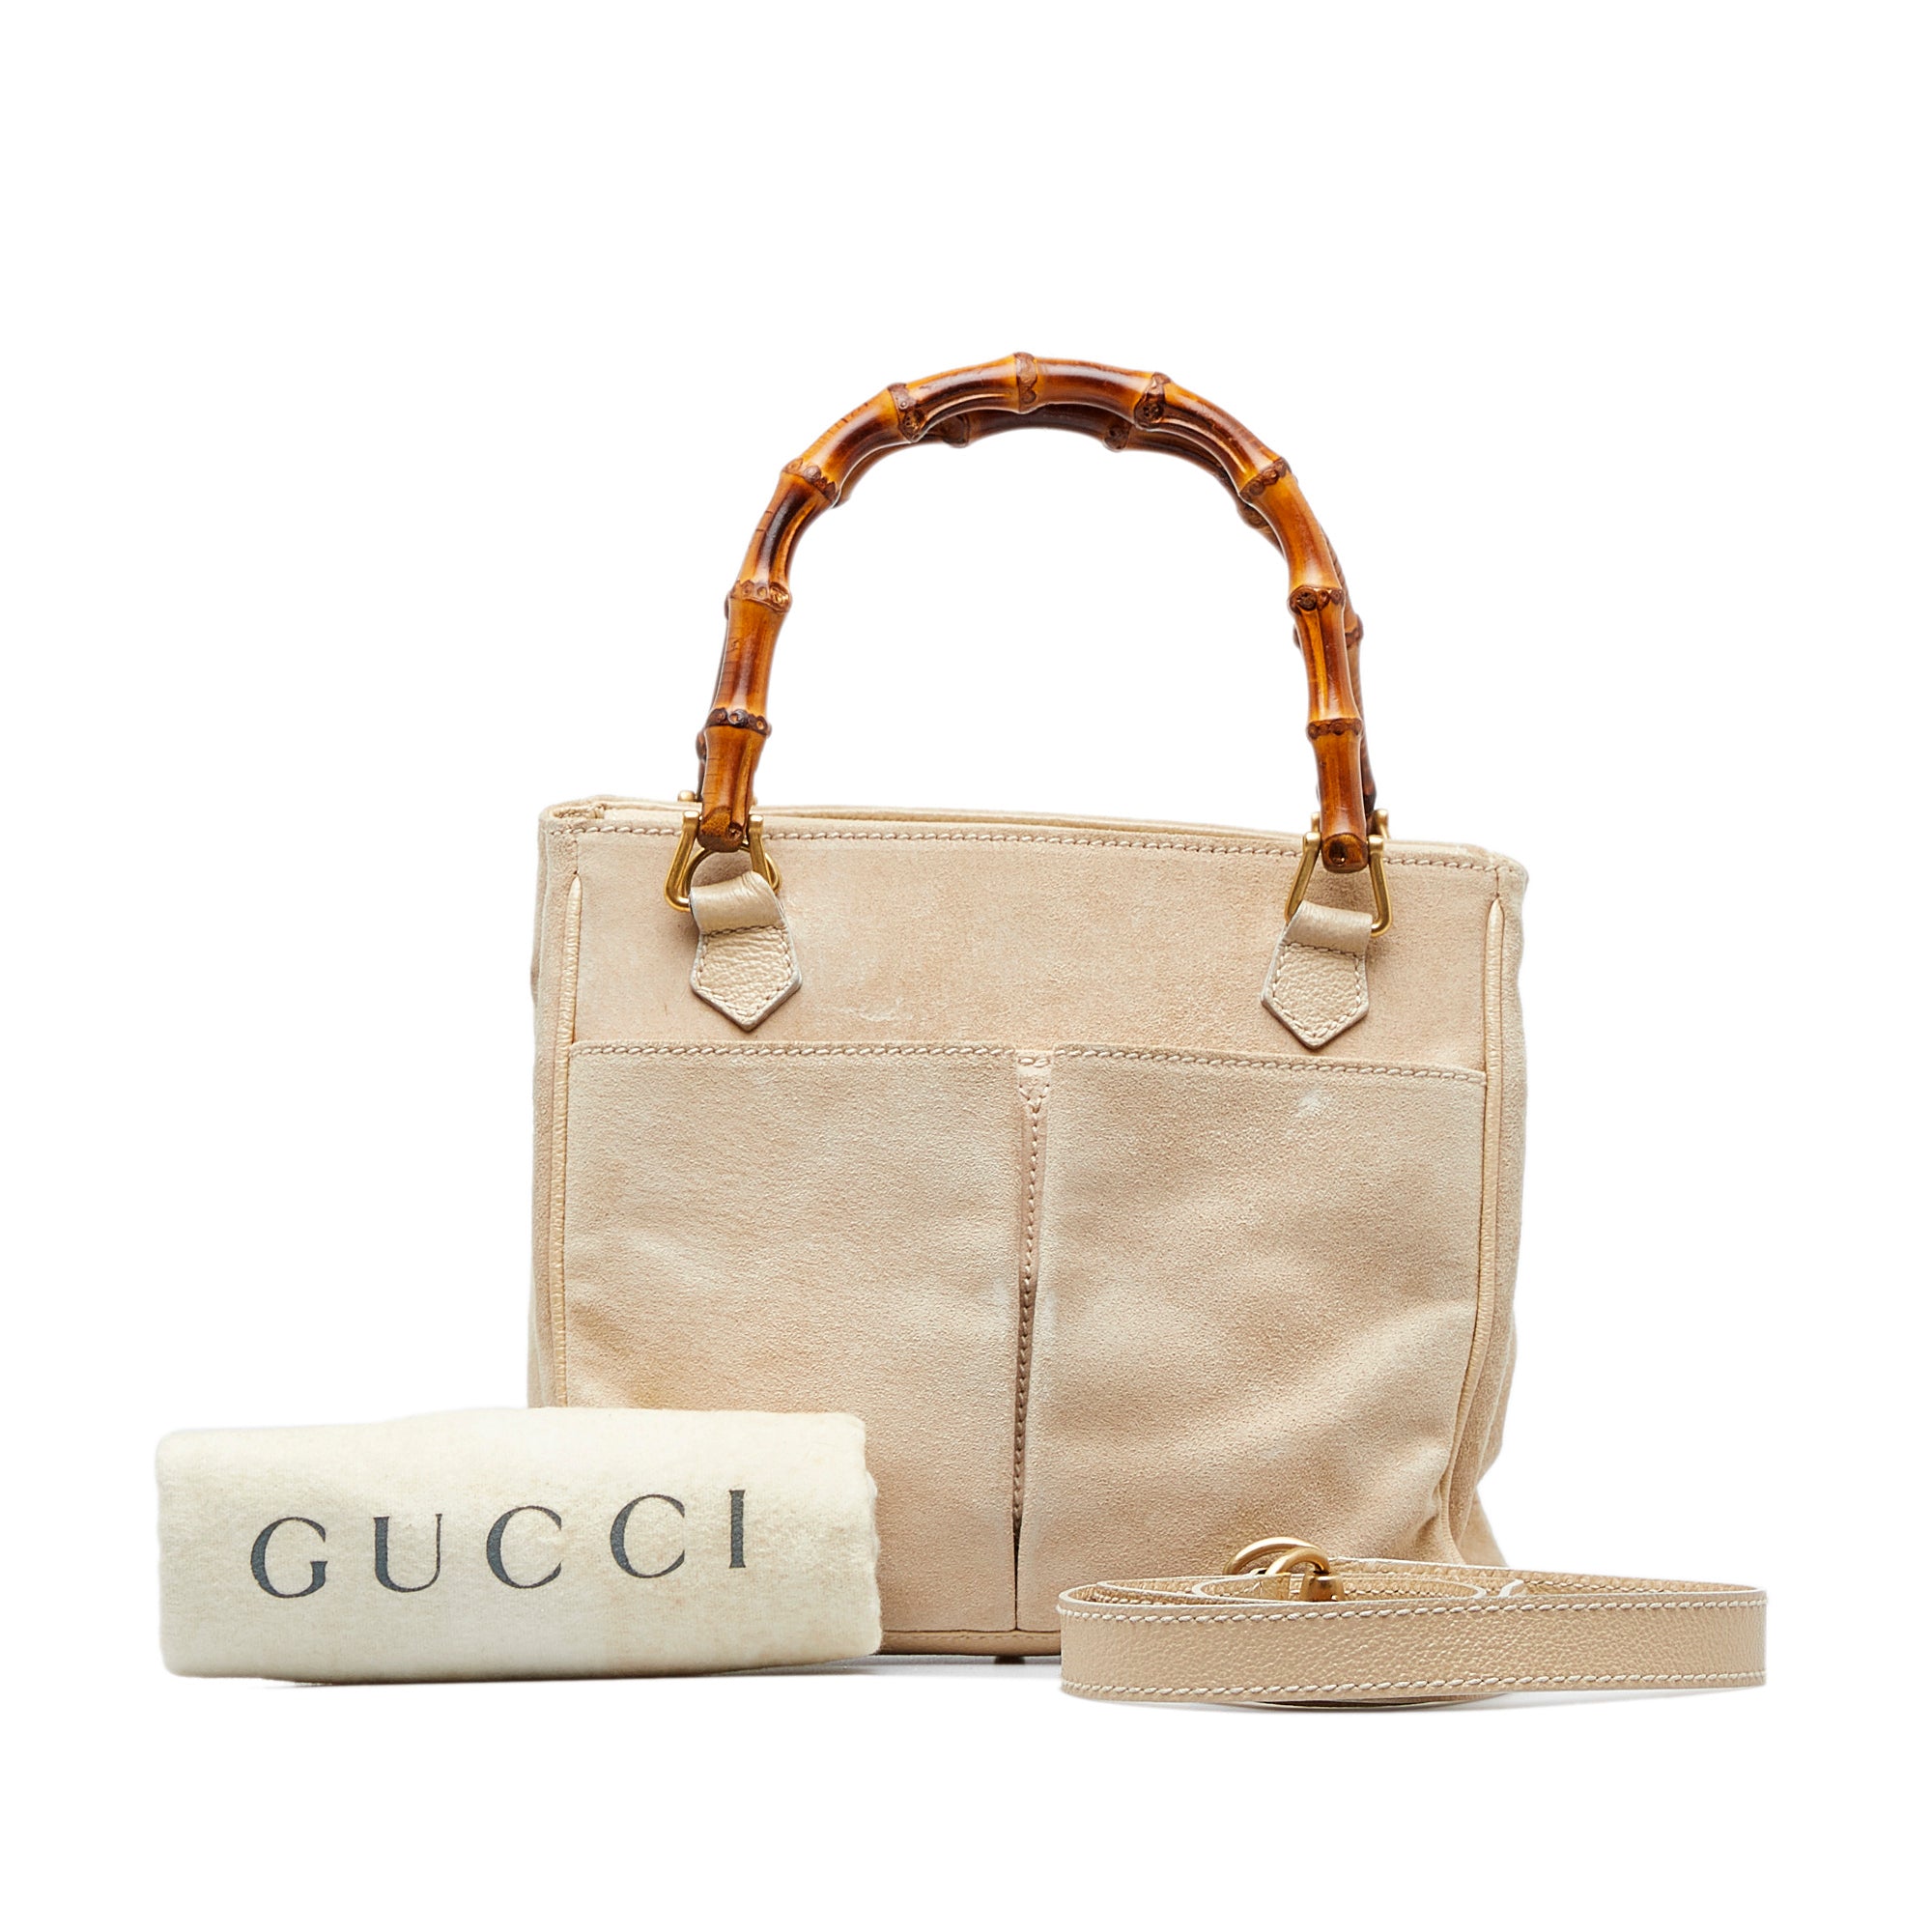 Gucci Large Suede Bamboo Tote